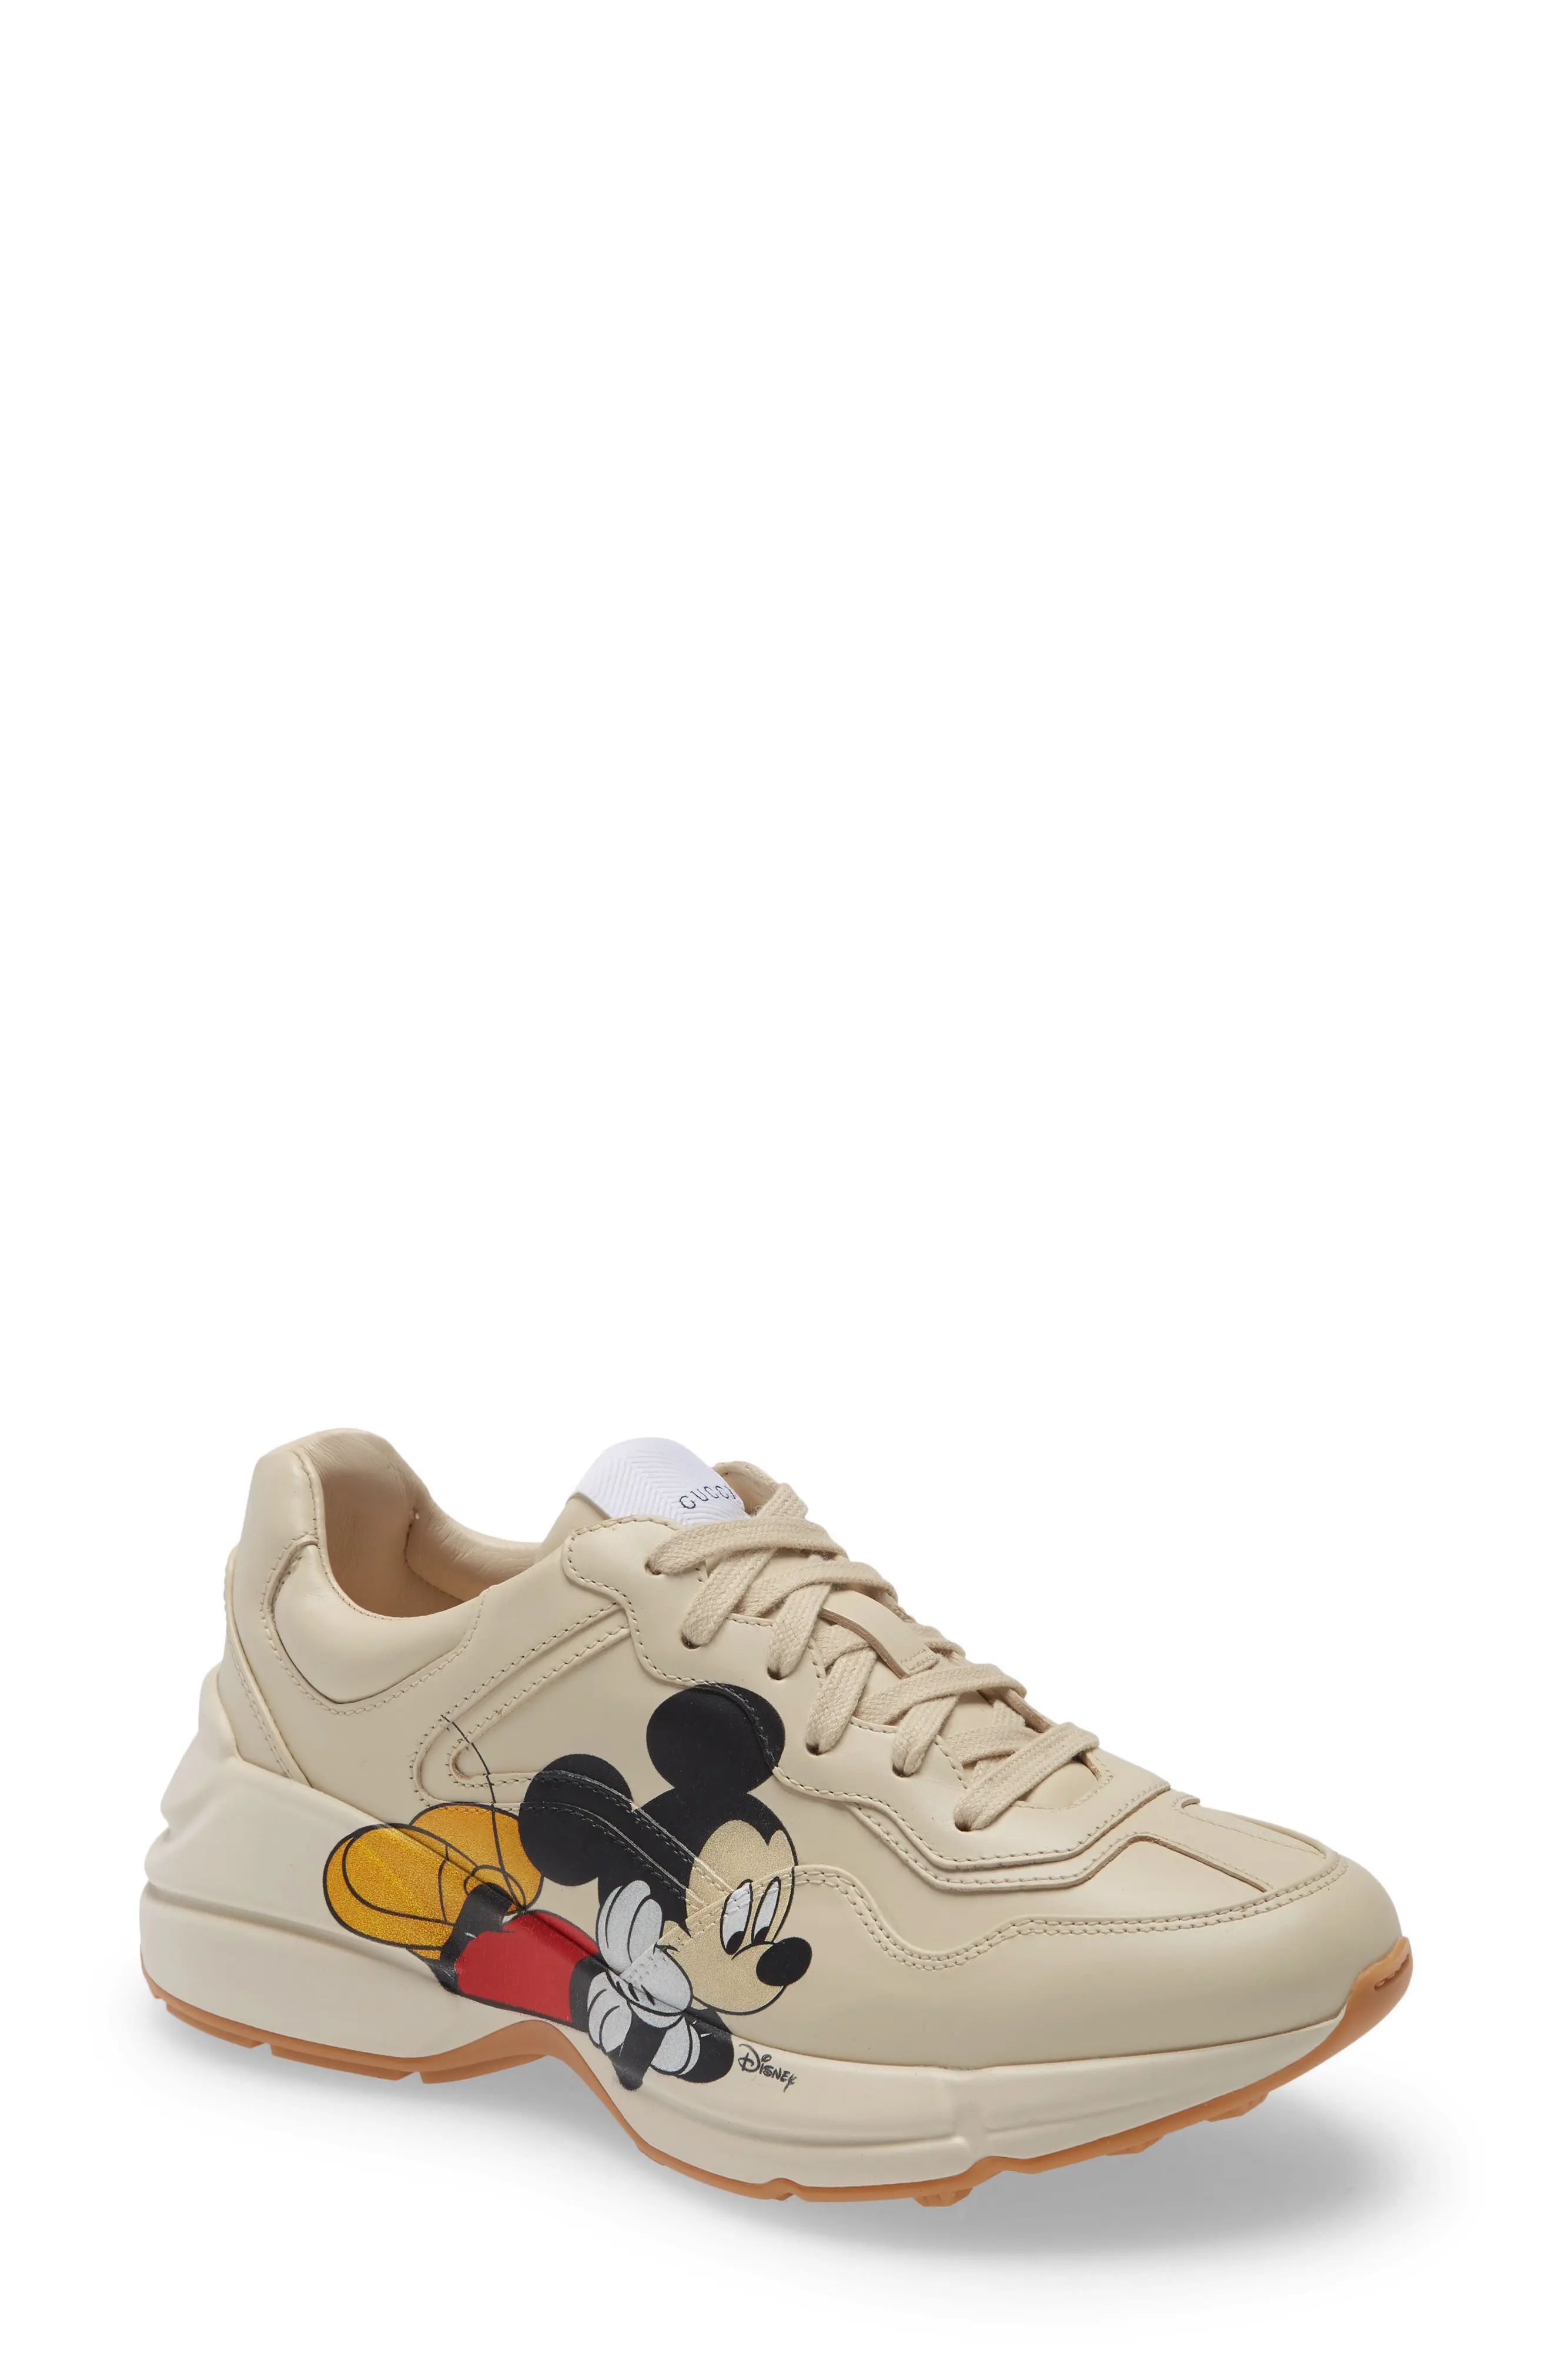 Gucci x Disney Rhyton Mickey Mouse Sneaker, Size 7.5Us in Bone at Nordstrom | Nordstrom